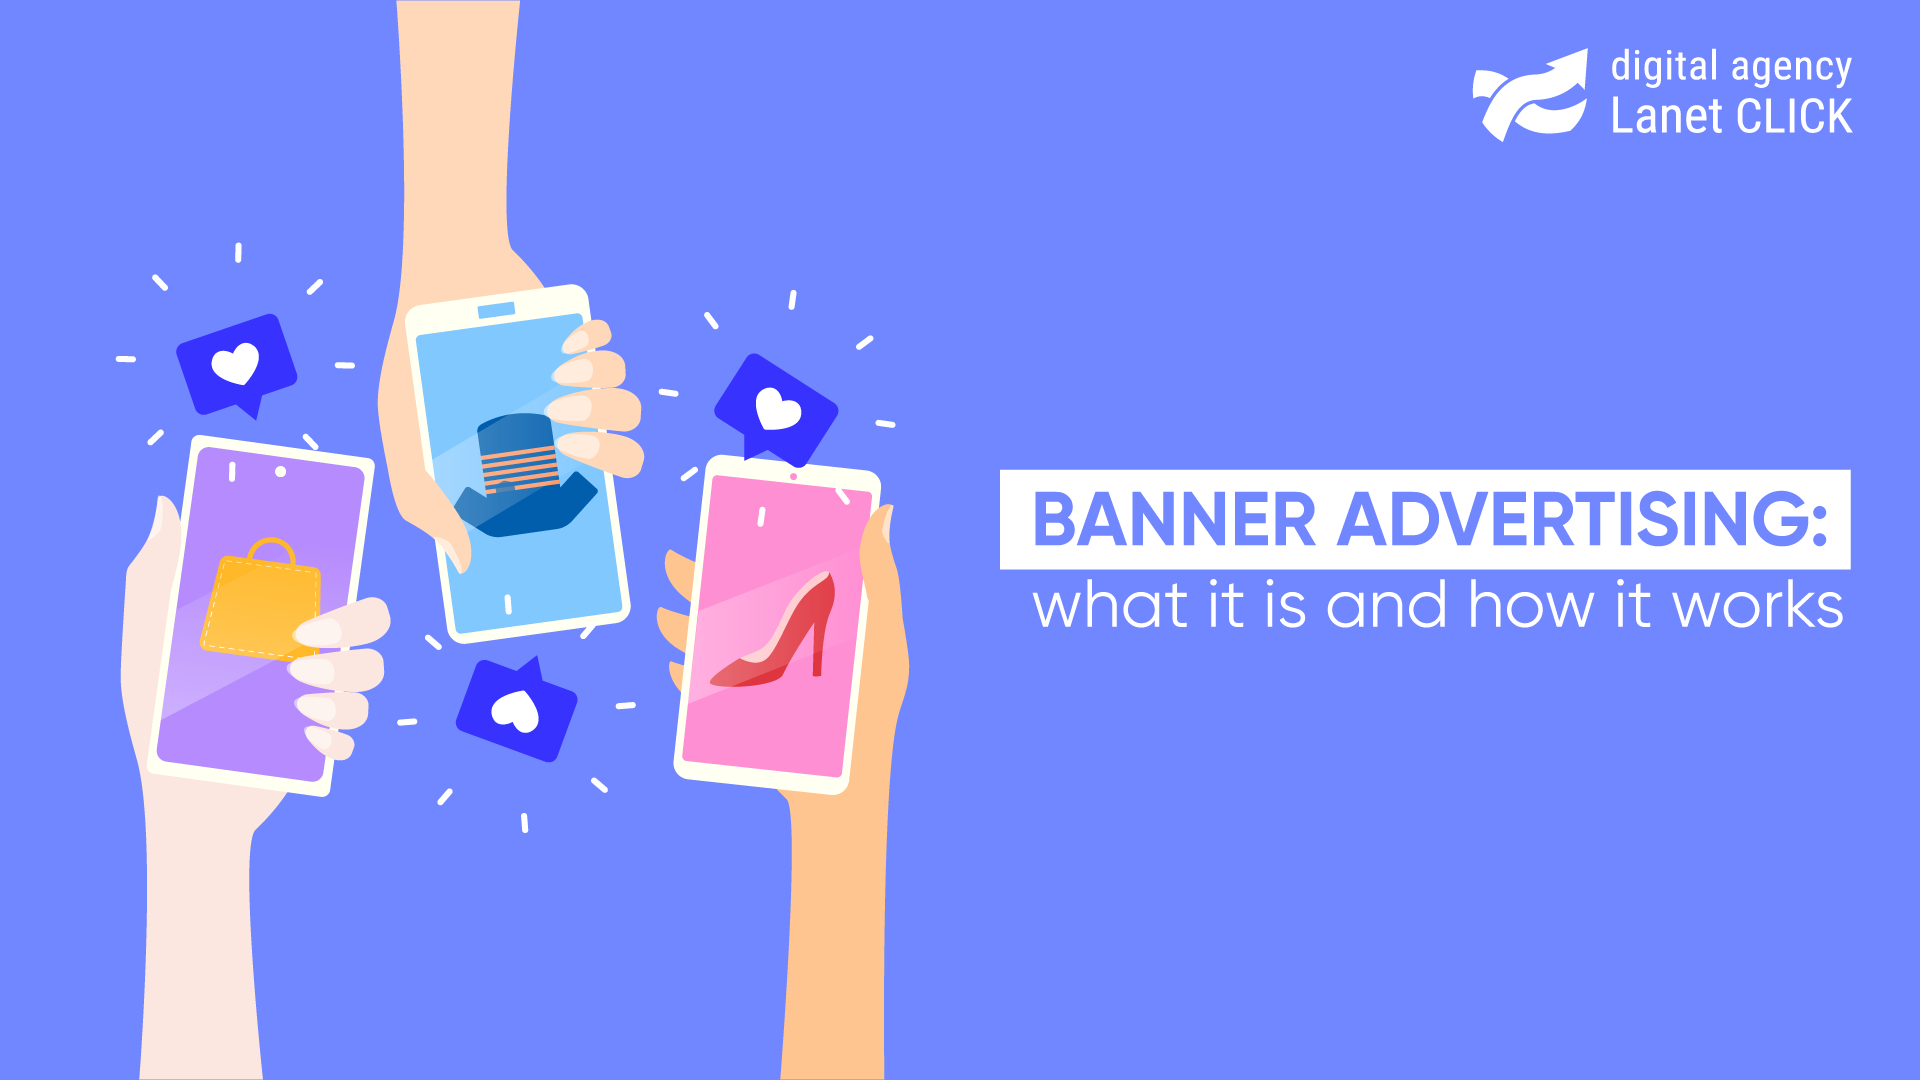 Banner advertising on the Internet: what it is and how it works